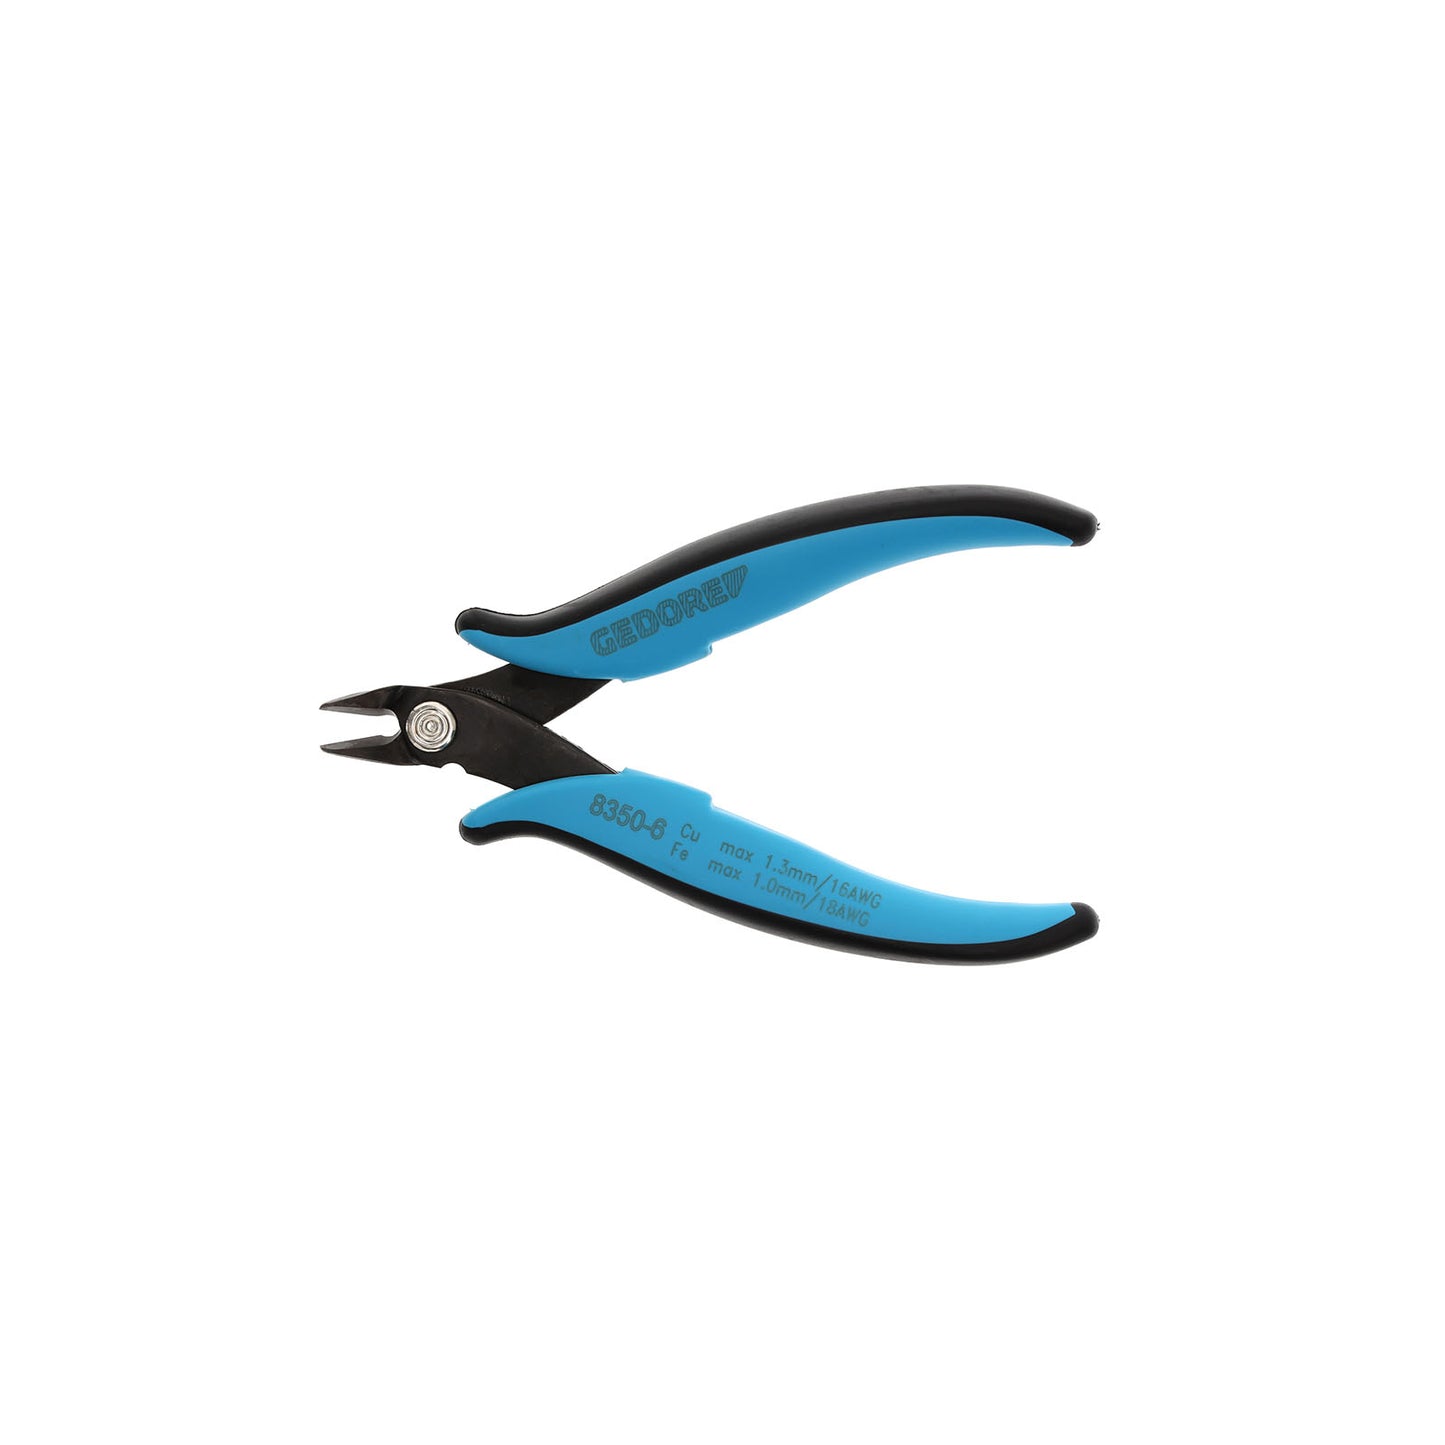 GEDORE 8350-6 - Electronic Cutting Pliers (1829009)